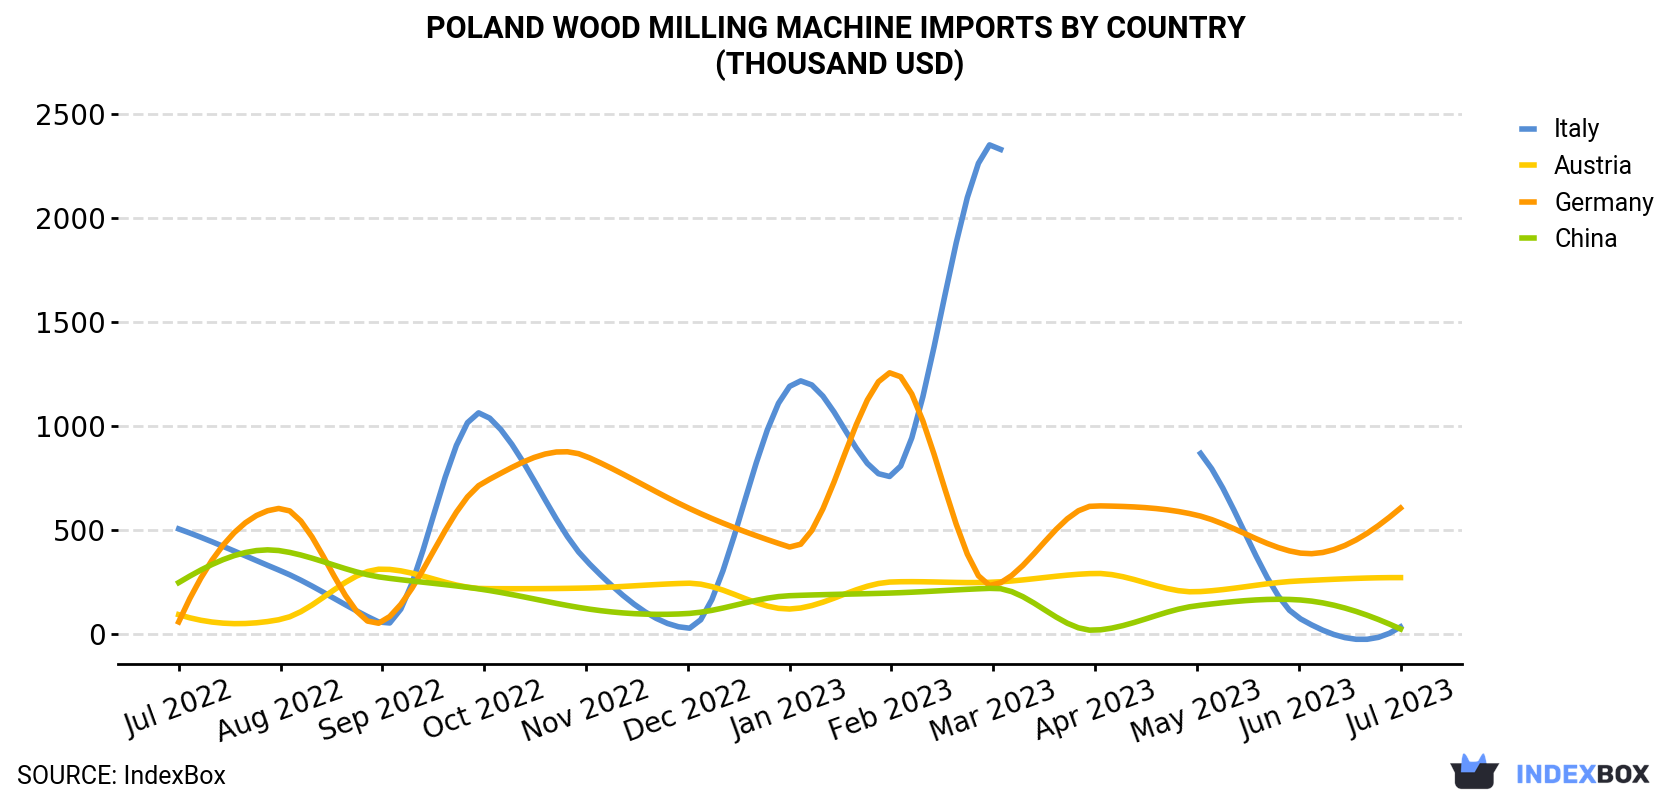 Poland Wood Milling Machine Imports By Country (Thousand USD)